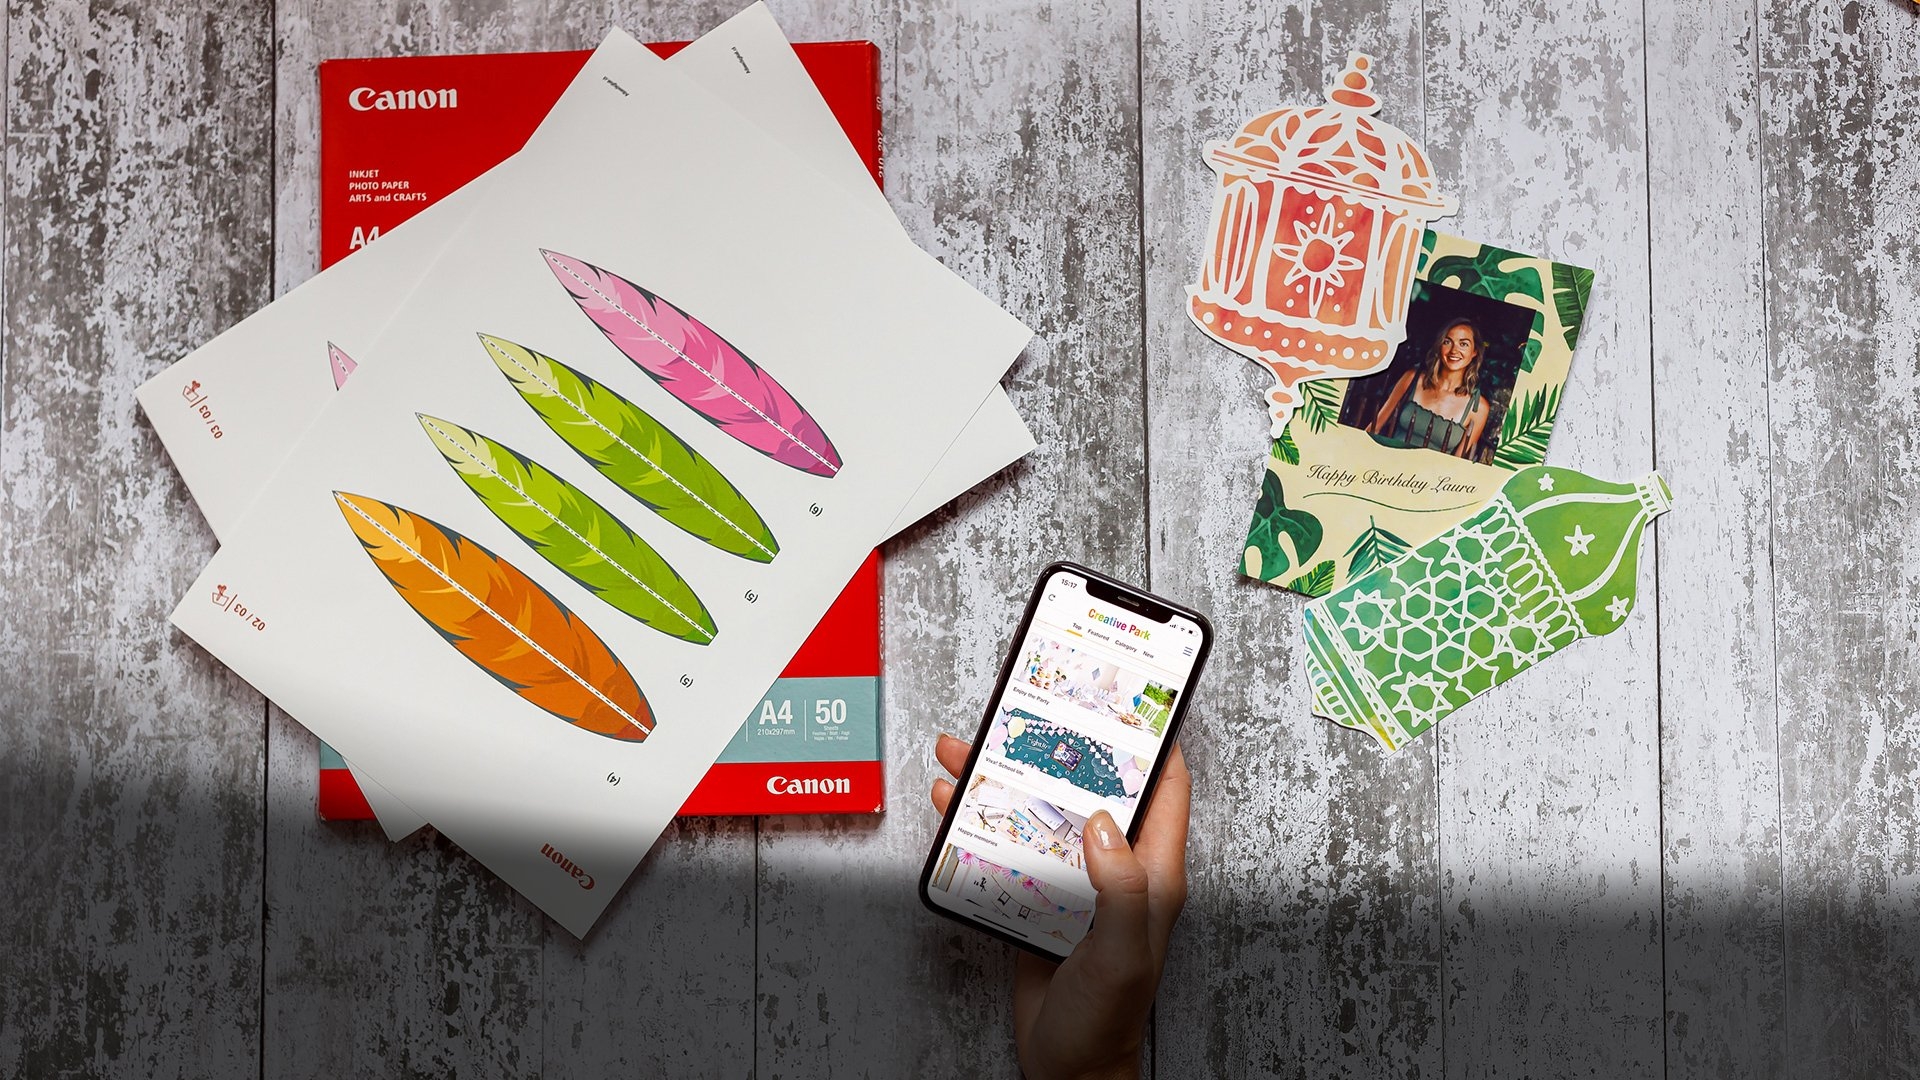 A hand holding a smartphone displaying the Creative Park app. Canon printer paper and Creative Park templates and designs are arranged on the table.